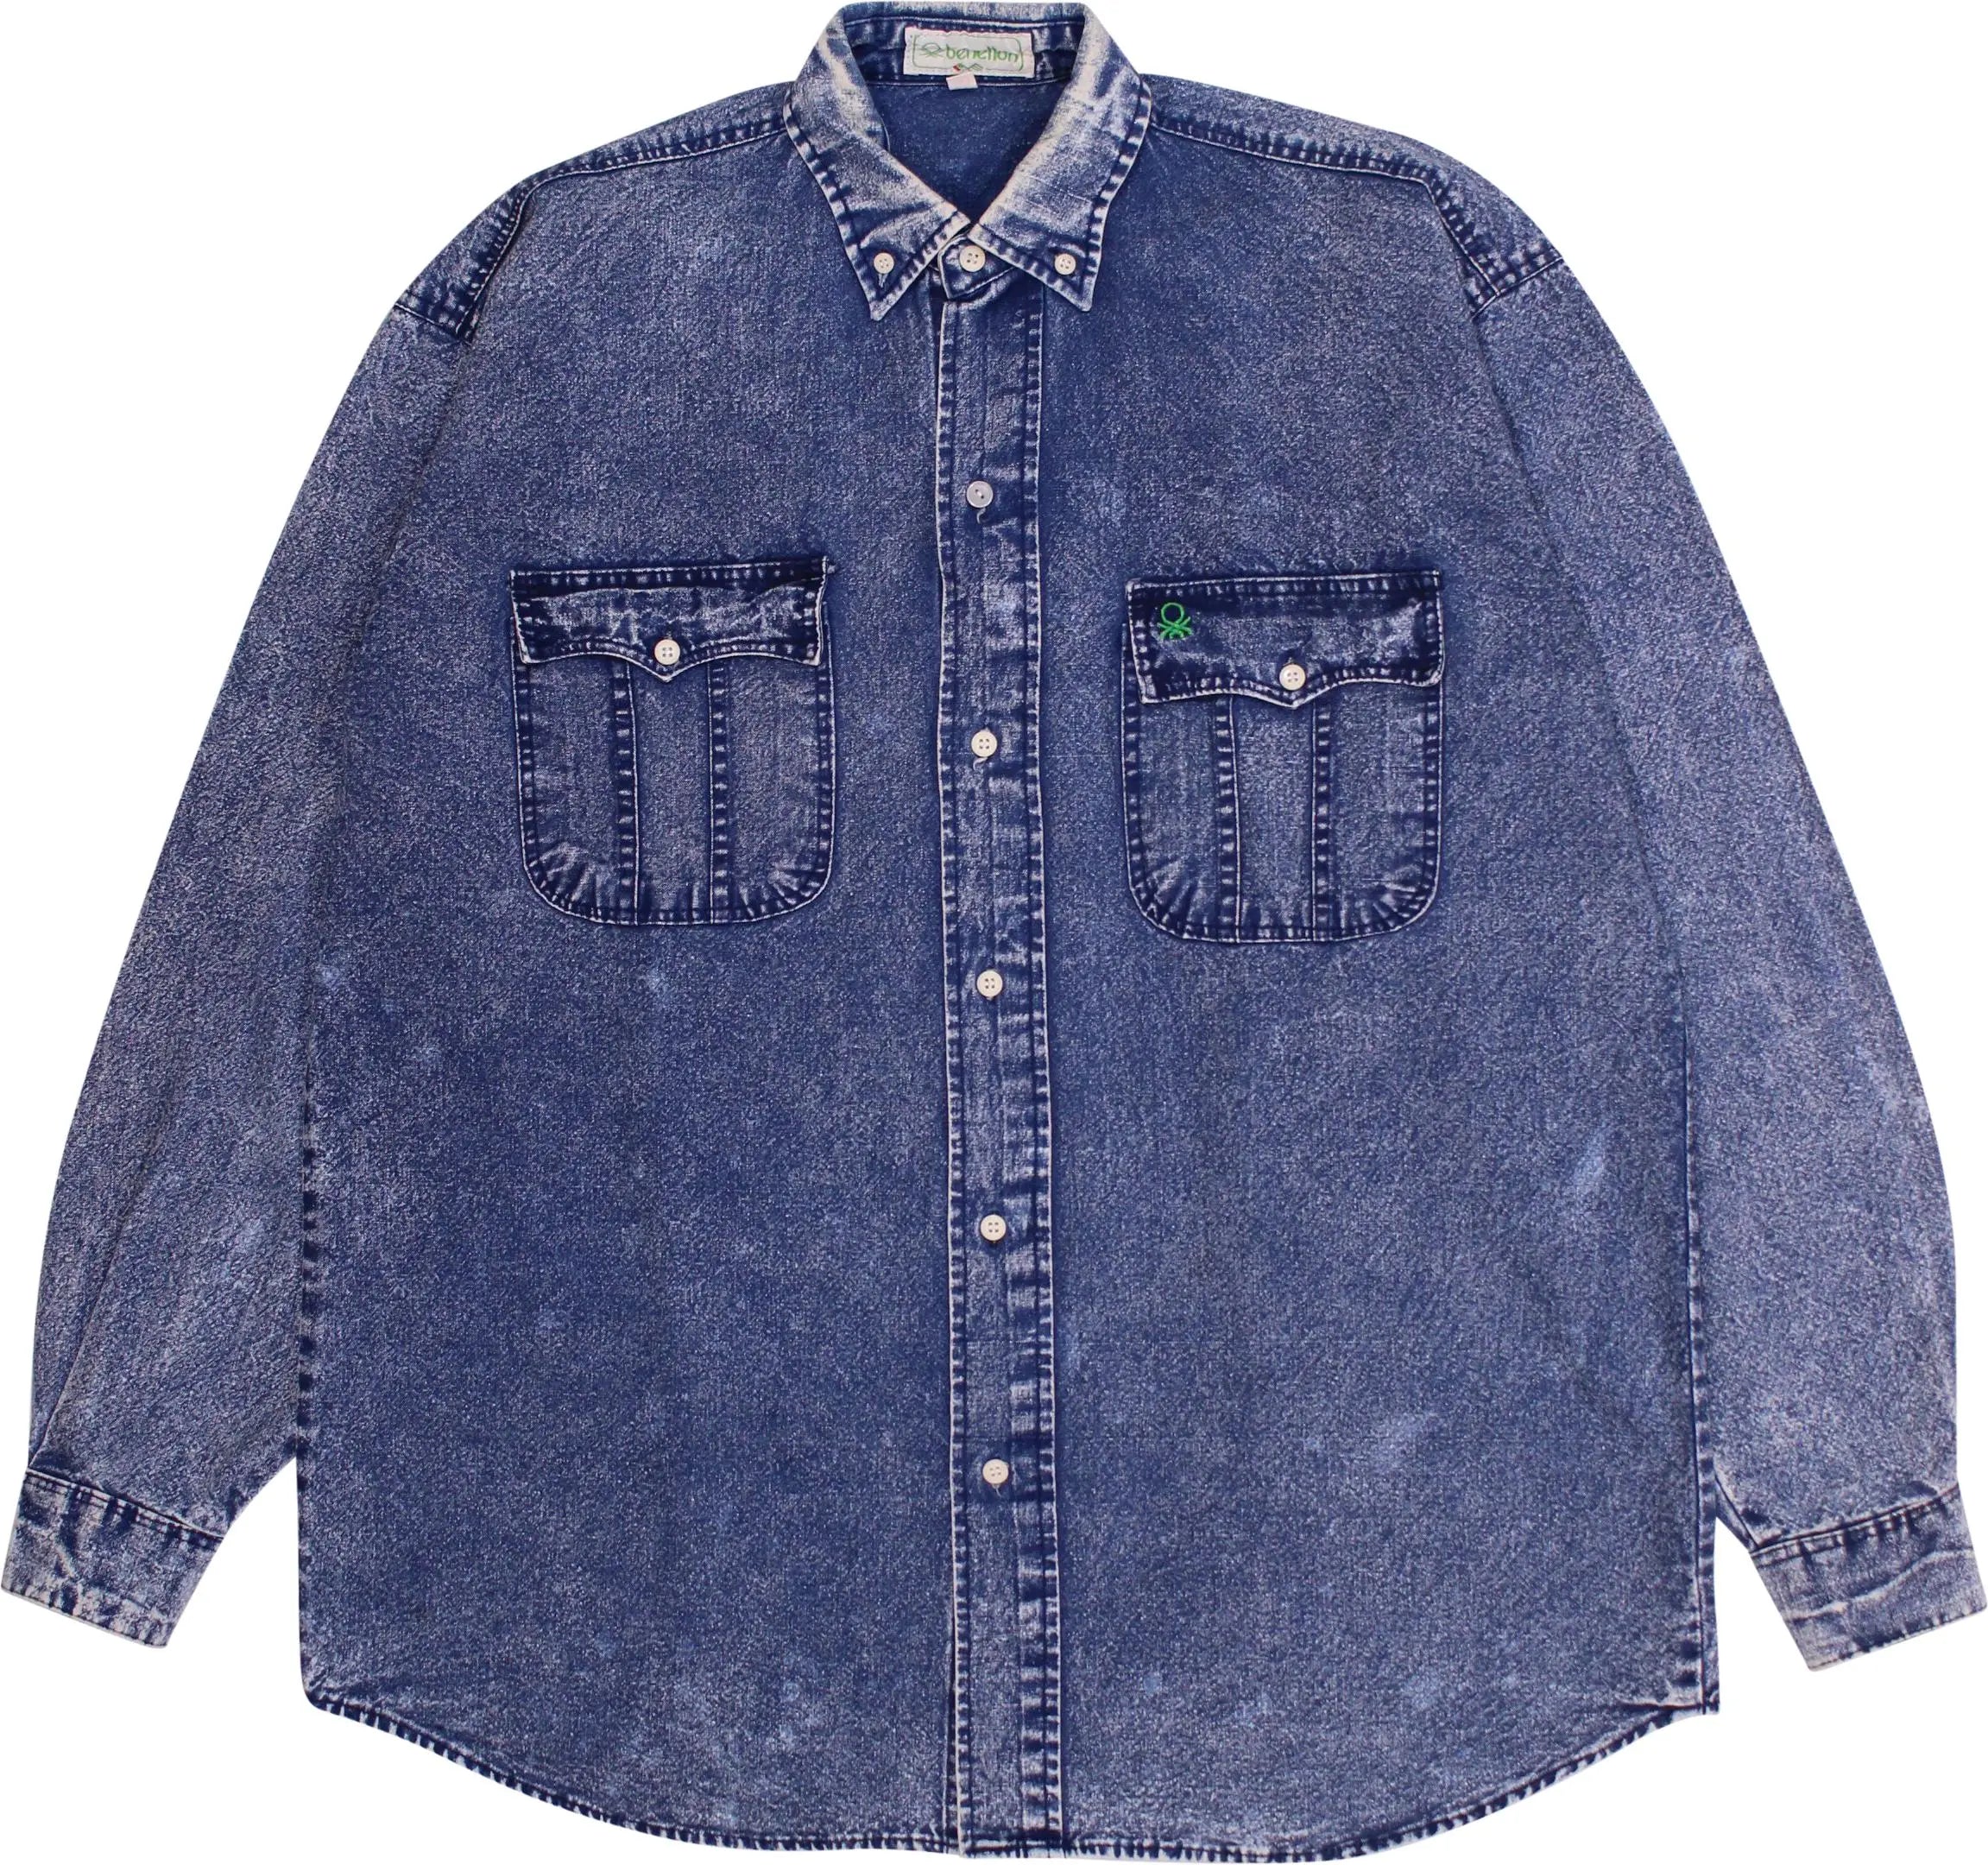 Benetton - 80s Acid Wash Shirt by Benetton- ThriftTale.com - Vintage and second handclothing